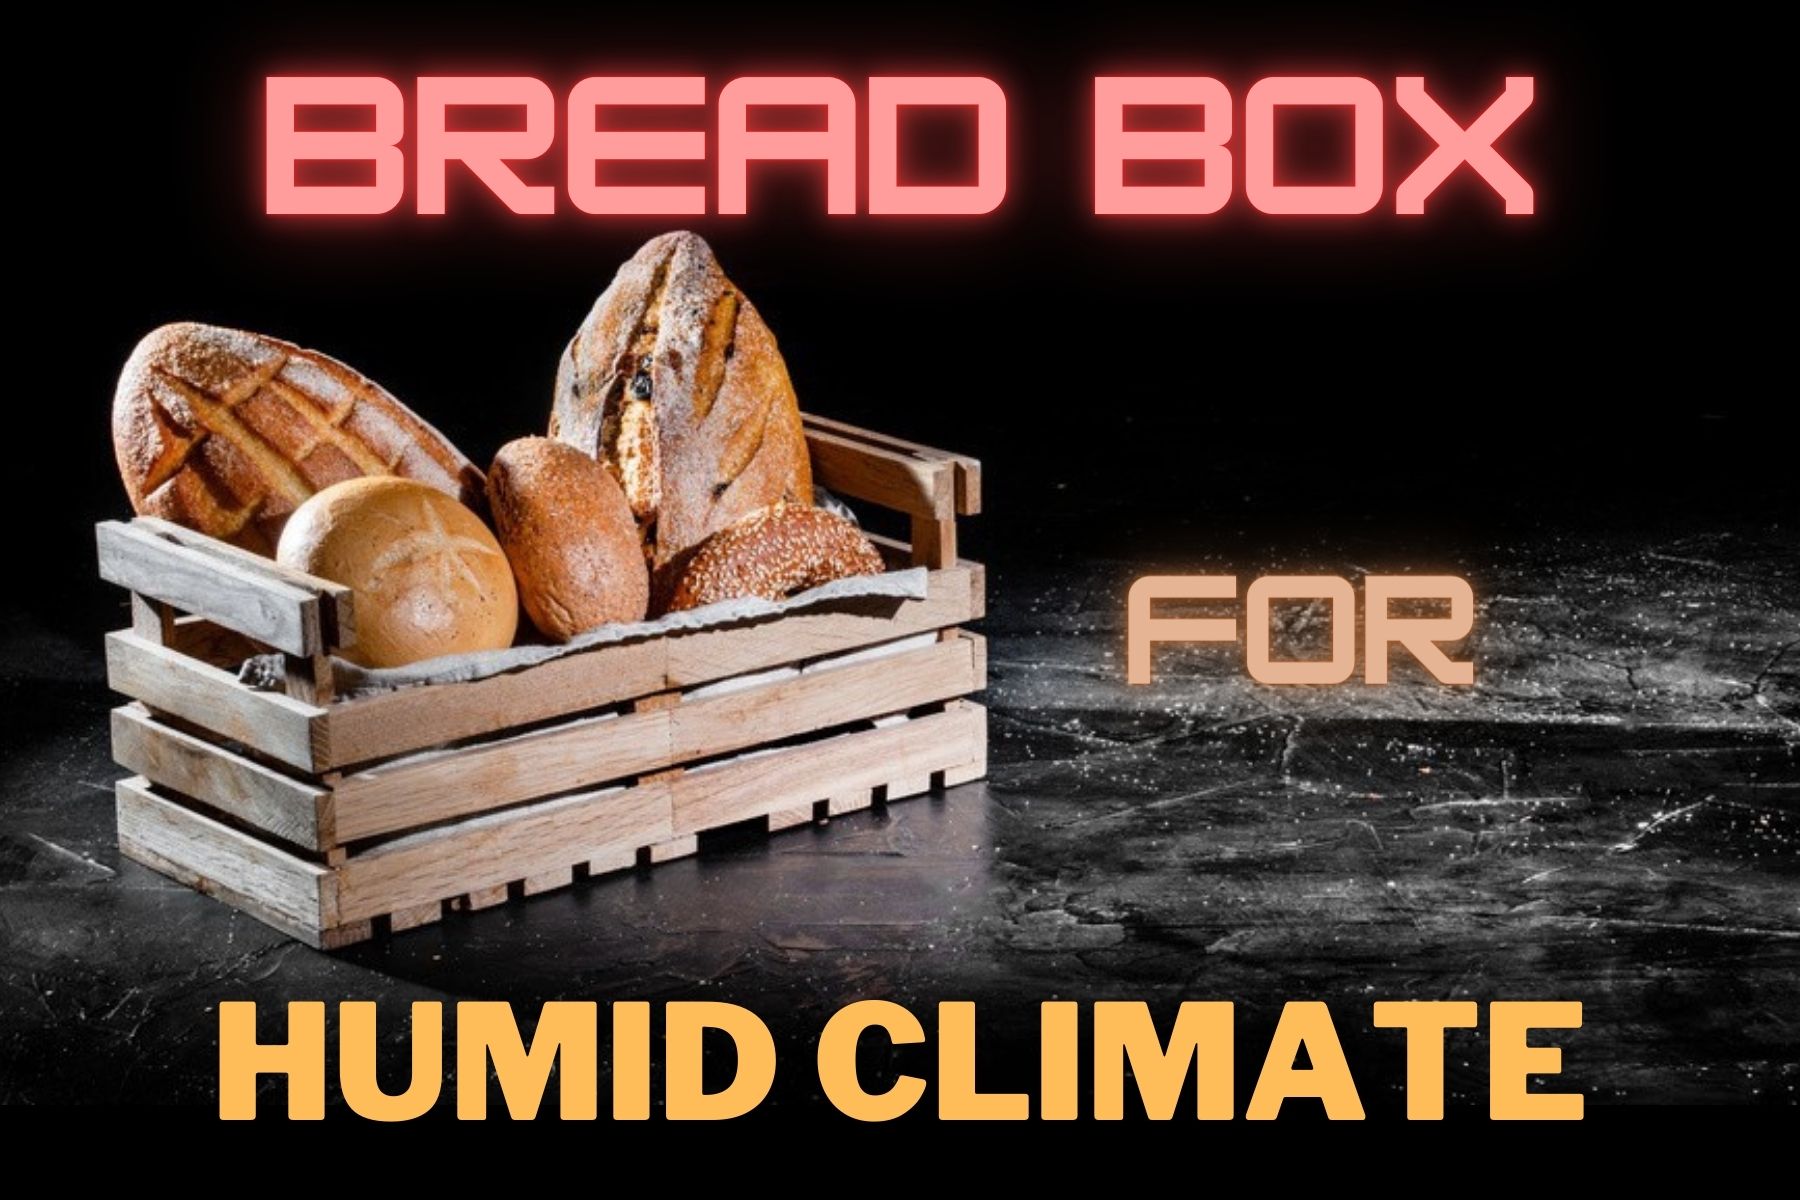 Best Bread Box For Humid Climate